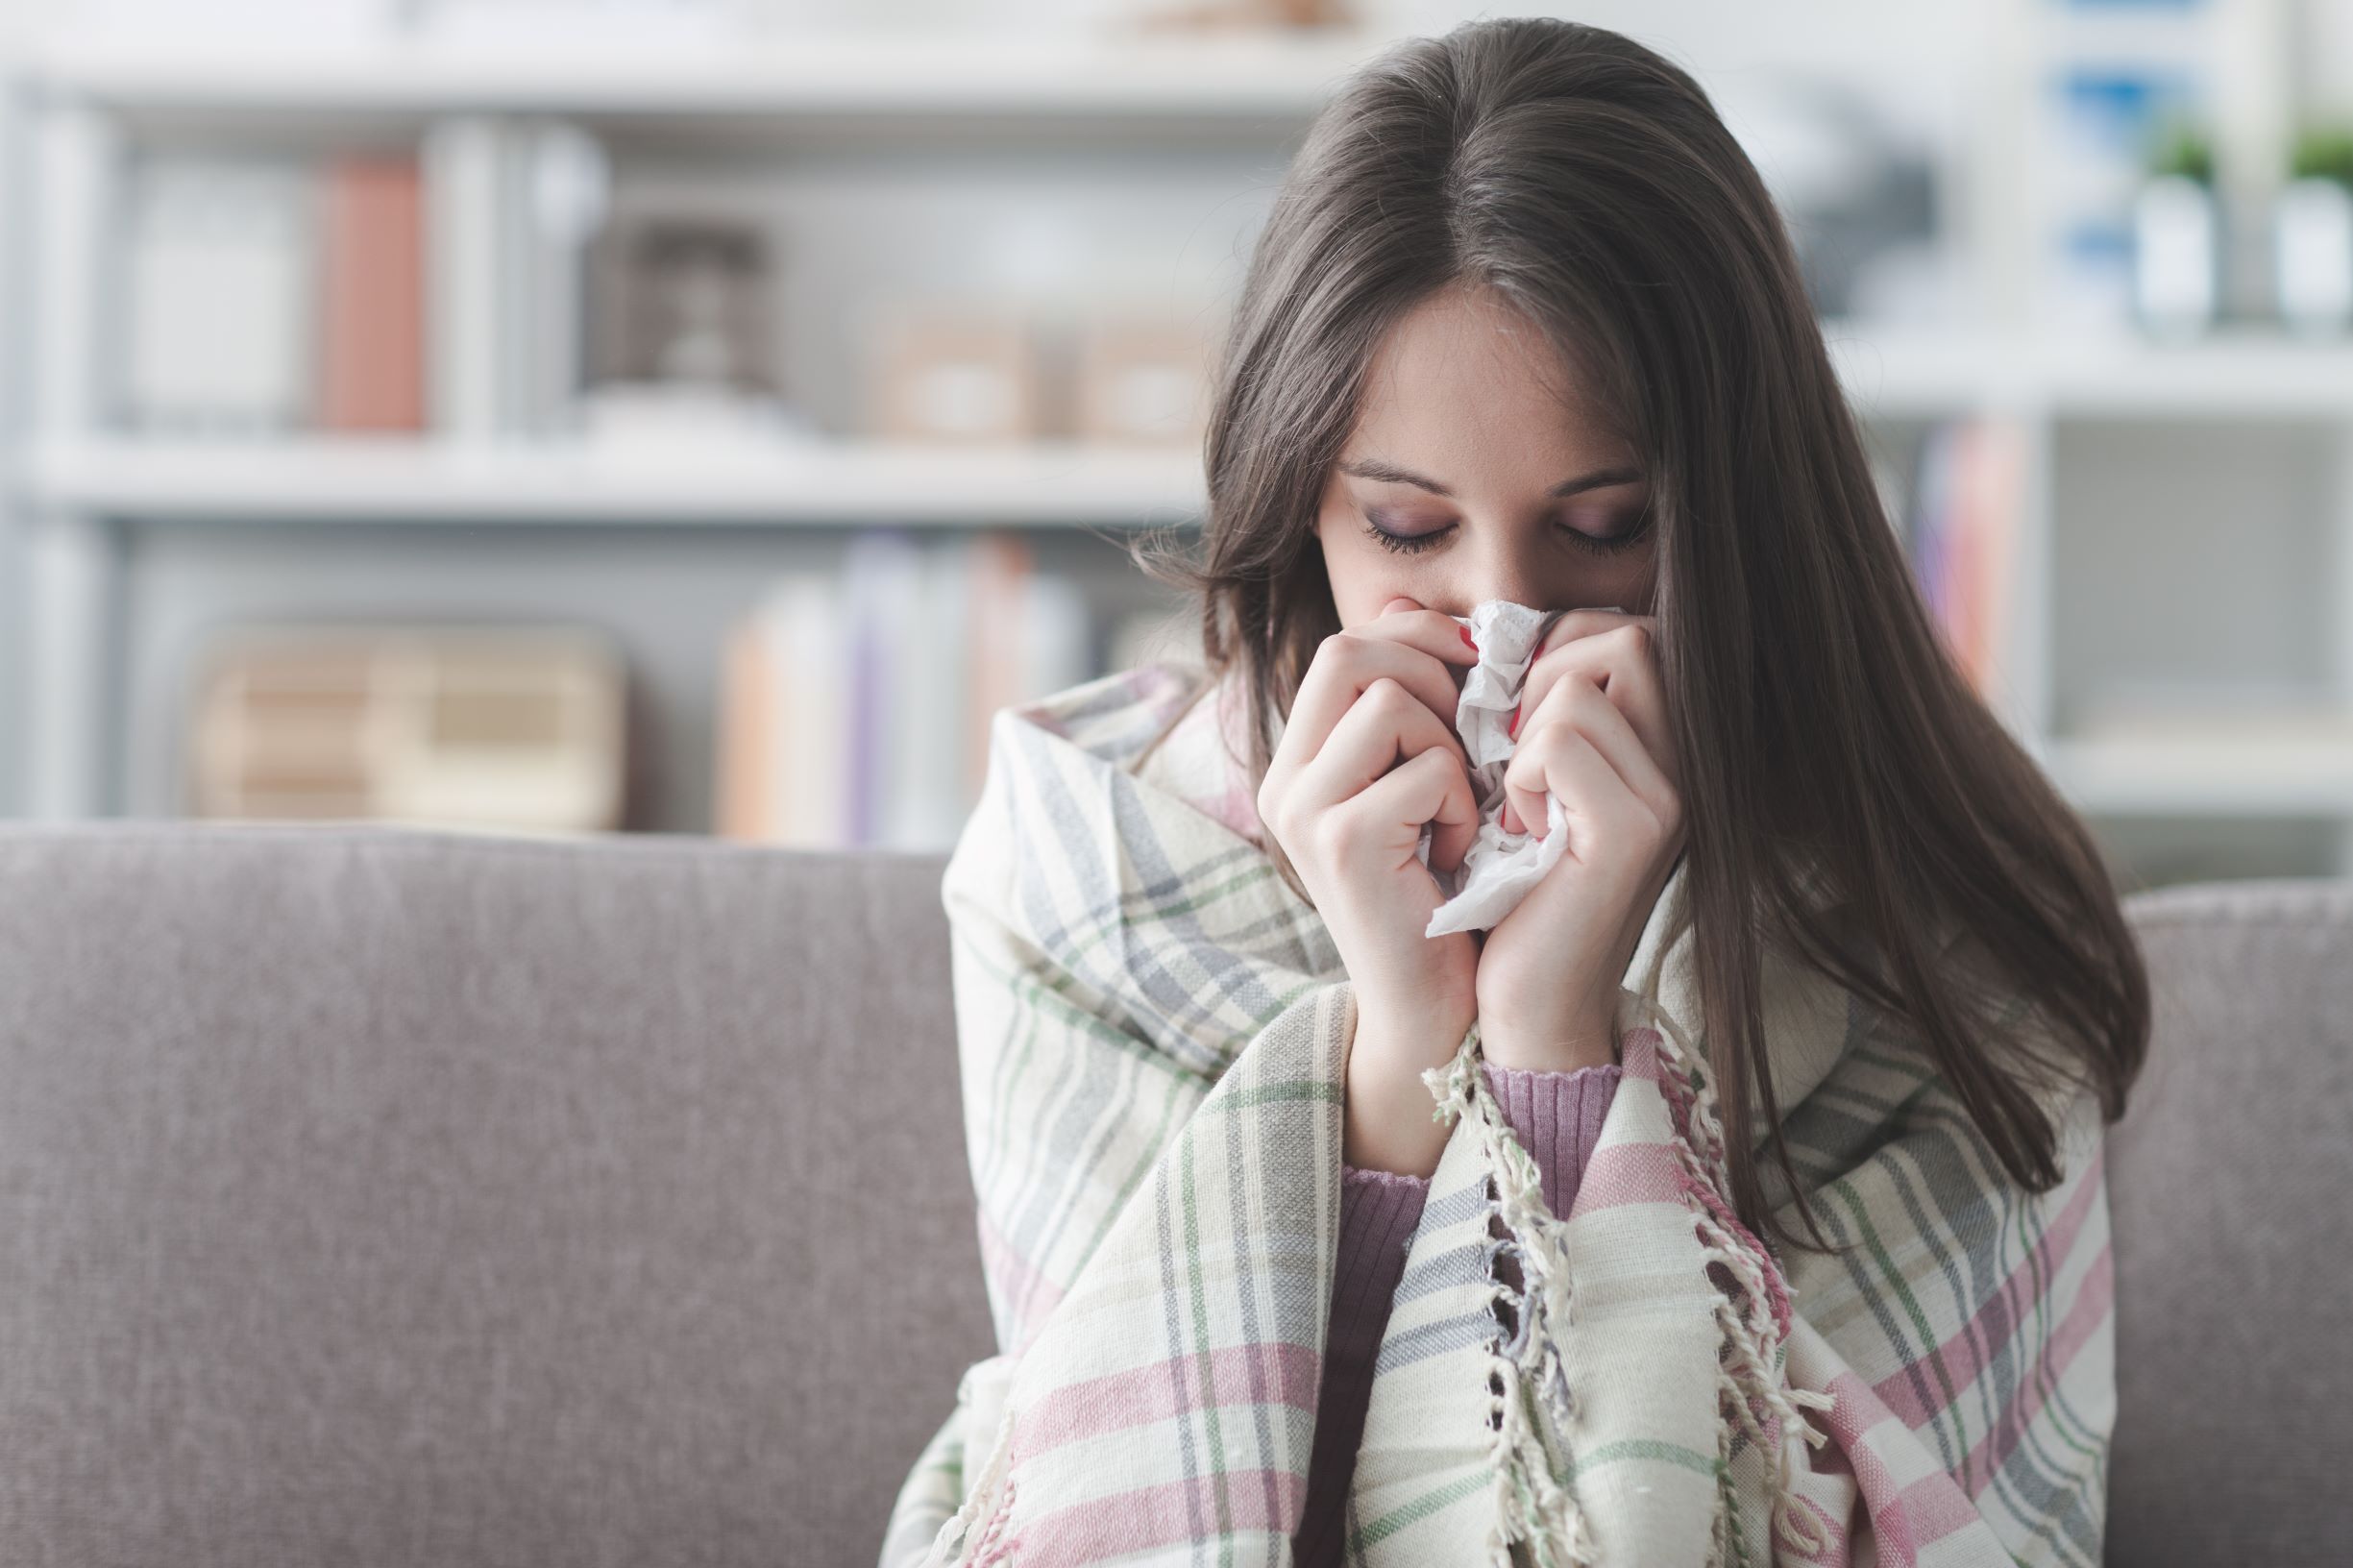 Woman suffering from cold and flu symptoms, putting paper tissue on her nose. Sitting on couch and covered with blankets.